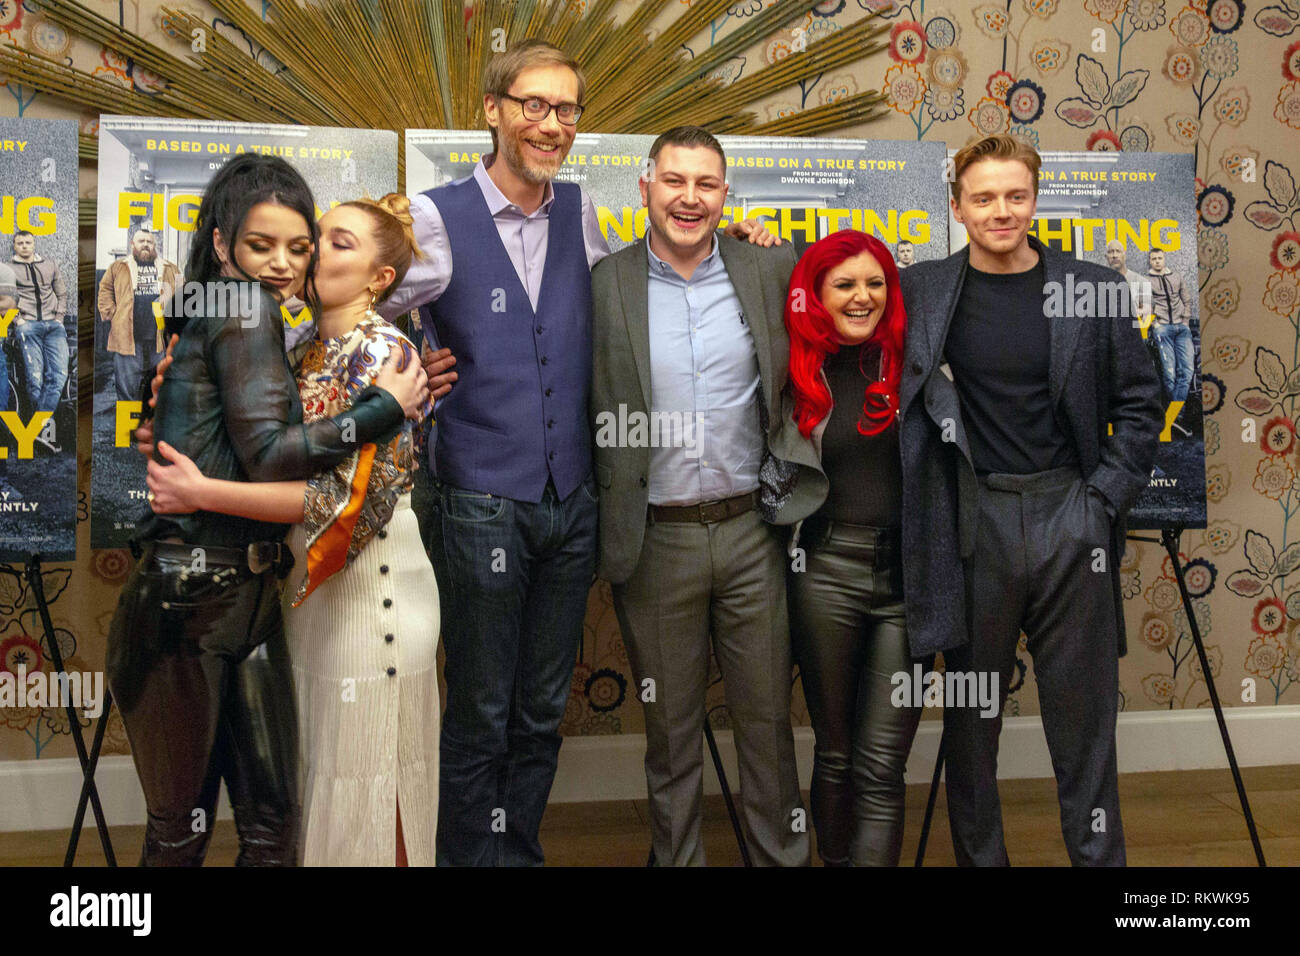 New York, NY, USA. 11th Feb. 2019. (L-R) WWE star Paige, actress, Florence Pugh, writer and director Stephen Merchant, Zak Bevis aka Zack Zodiac, Julia “Sweet Saraya” Hamer-Bevis, and actor Jack Lowden attend the New York Tastemaker screening of “Fighting with My Family” at the Crosby Street Hotel in New York City on February 11, 2019. Credit: Jeremy Burke/Alamy Live News Stock Photo